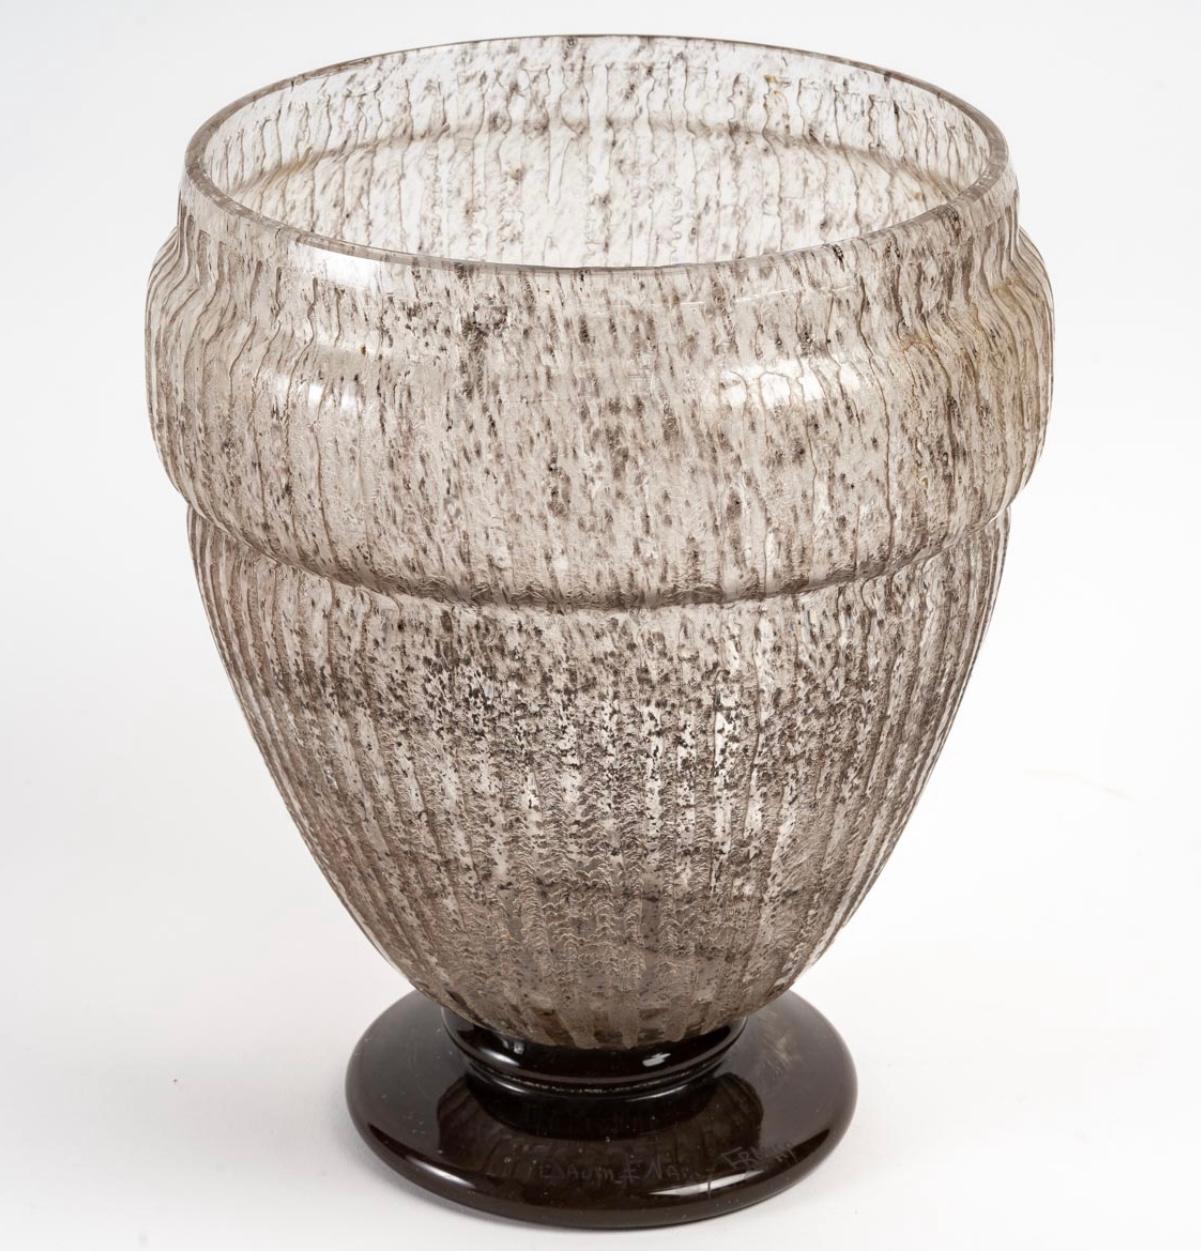 Vase made acid-etched glass.
Engraved signature on the base.

Perfect condition 

Height: 23,5 cm
Diameter : 18,5 cm.